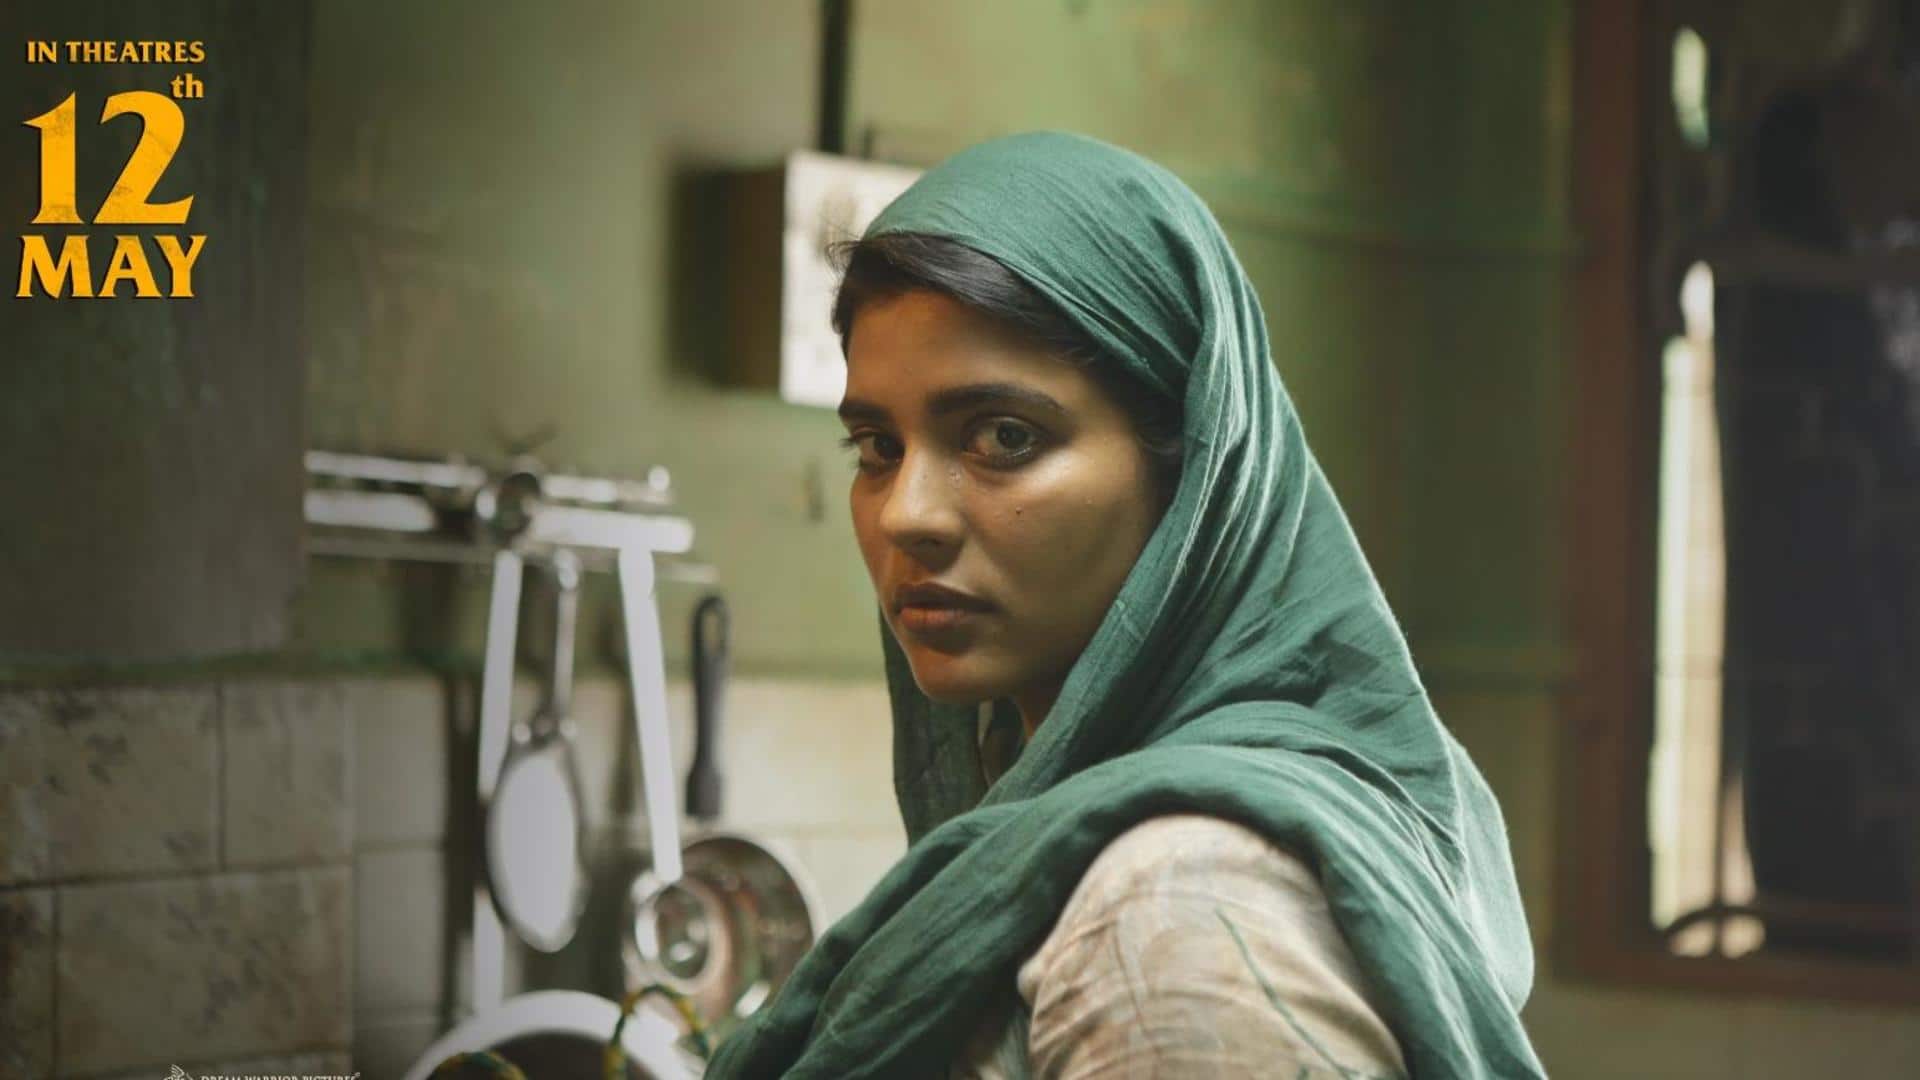 Aishwarya Rajesh gets security amid 'Farhana' controversy; makers release statement